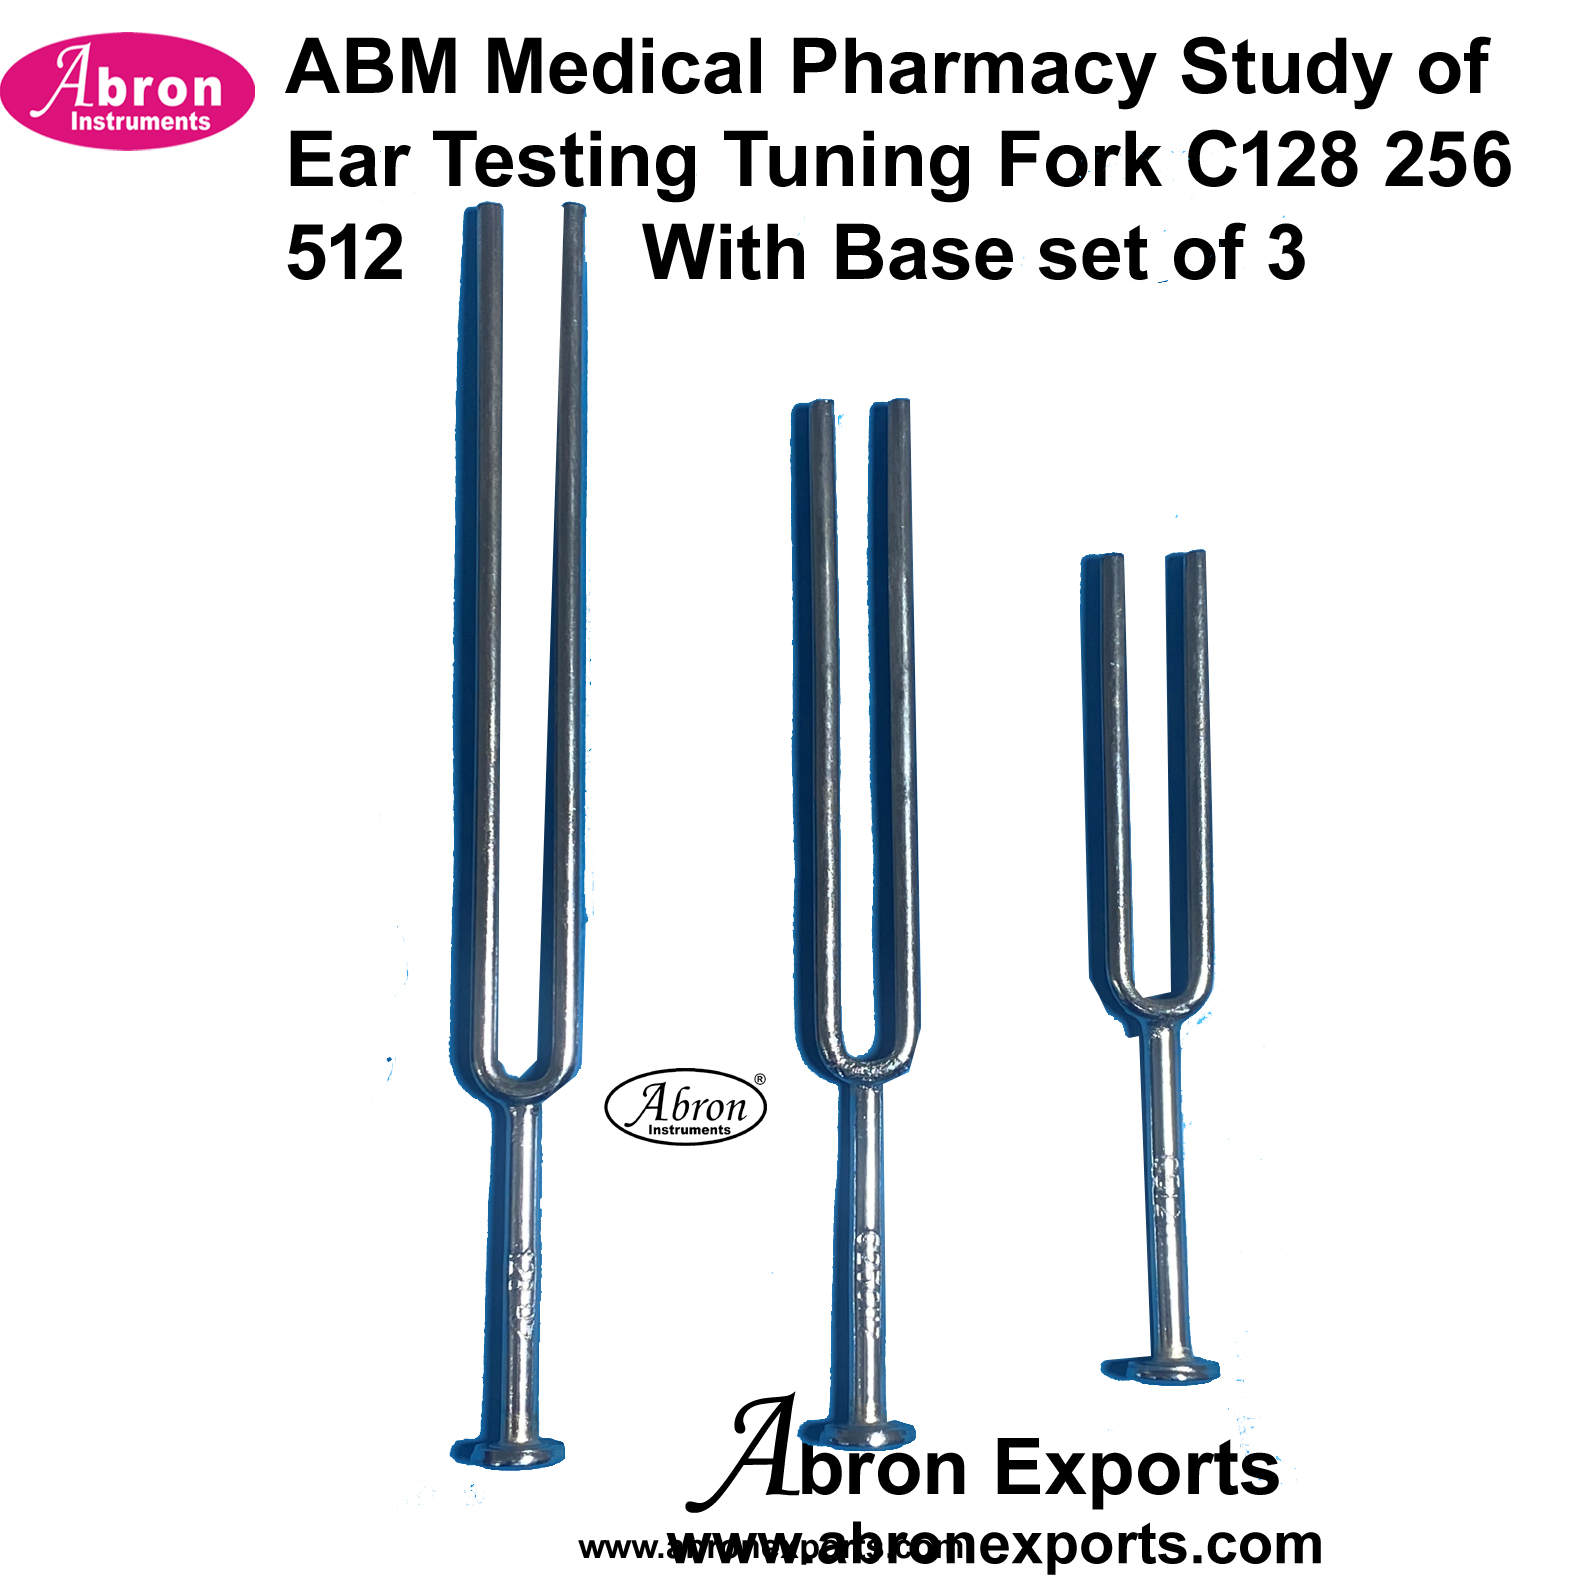 Medical ear testing tuning fork C 128 256 512 with base set of 3 abron ABM-2210TF3